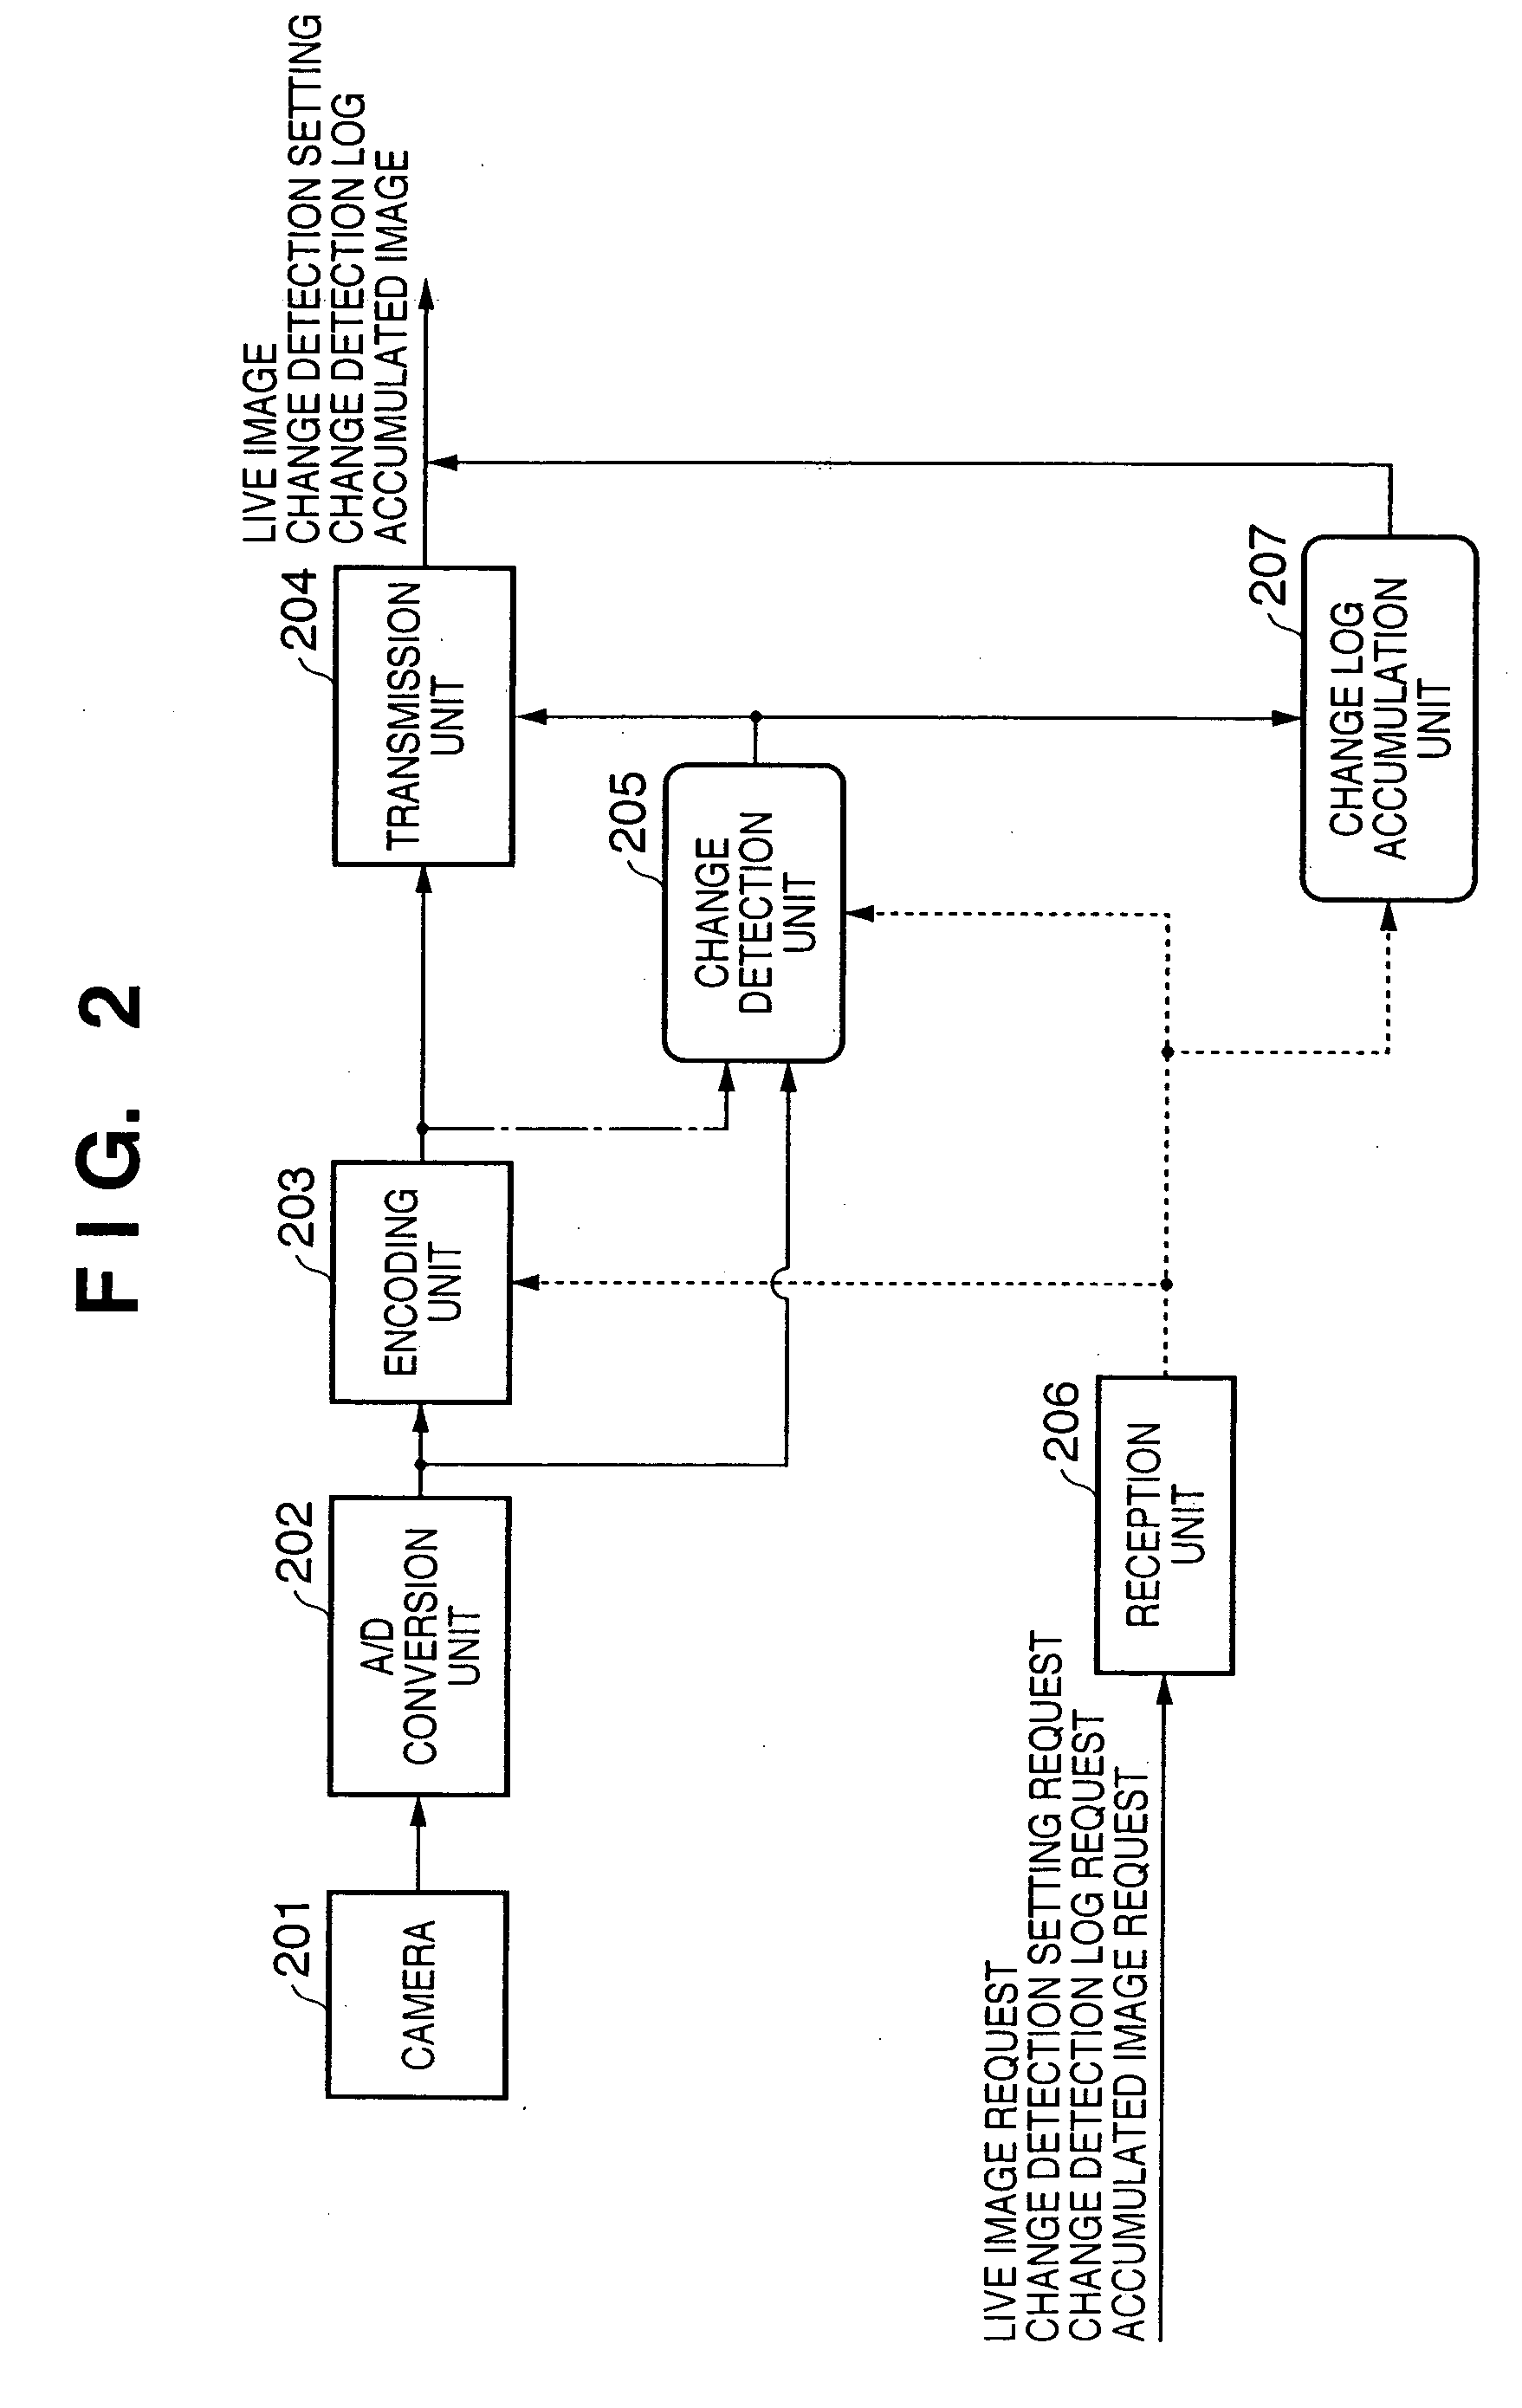 Display apparatus, image processing apparatus, and image processing system